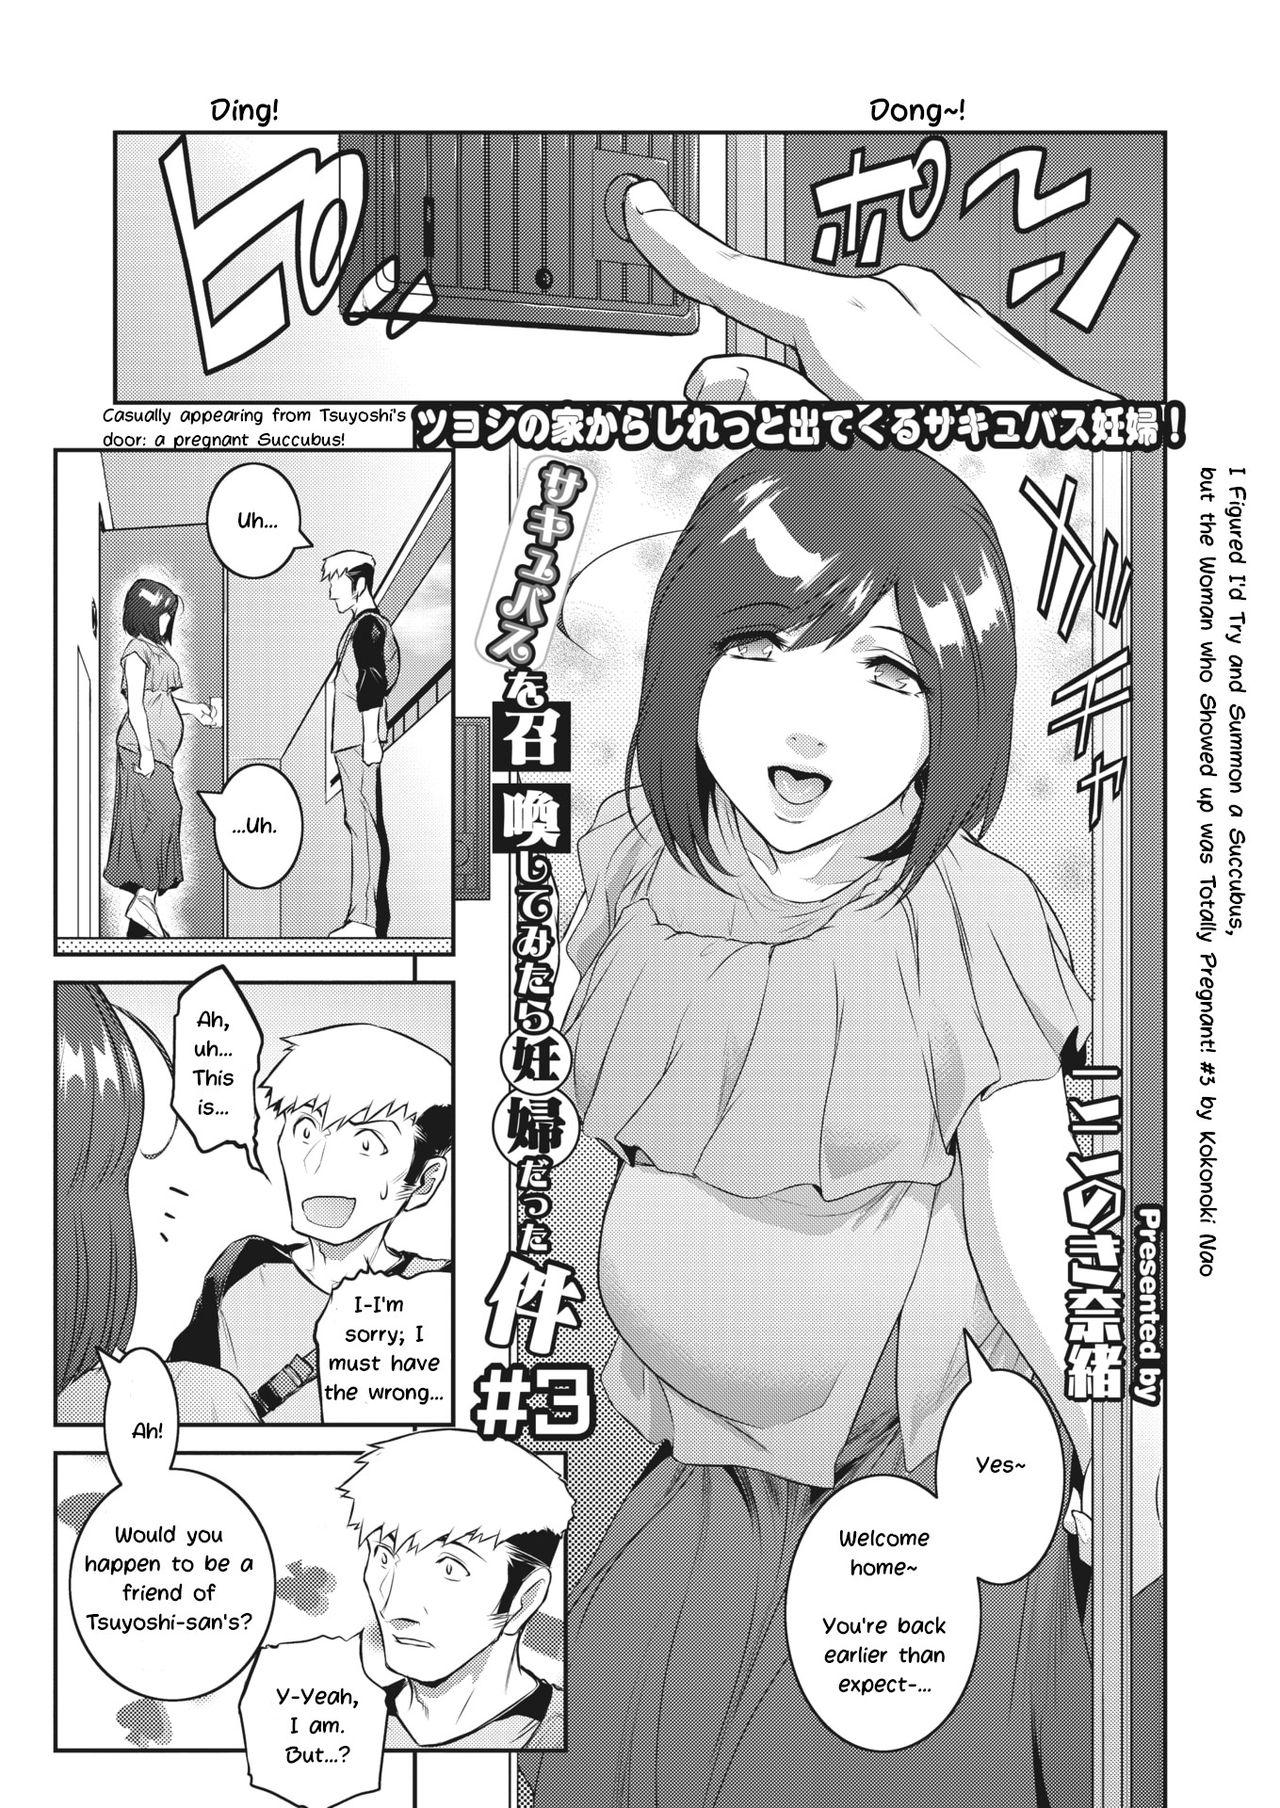 Guy Succubus o Shoukan Shitemitara Ninpu datta Ken | I Figured I'd Try and Summon a Succubus, but... Ch. 2-3 Gorgeous - Page 5